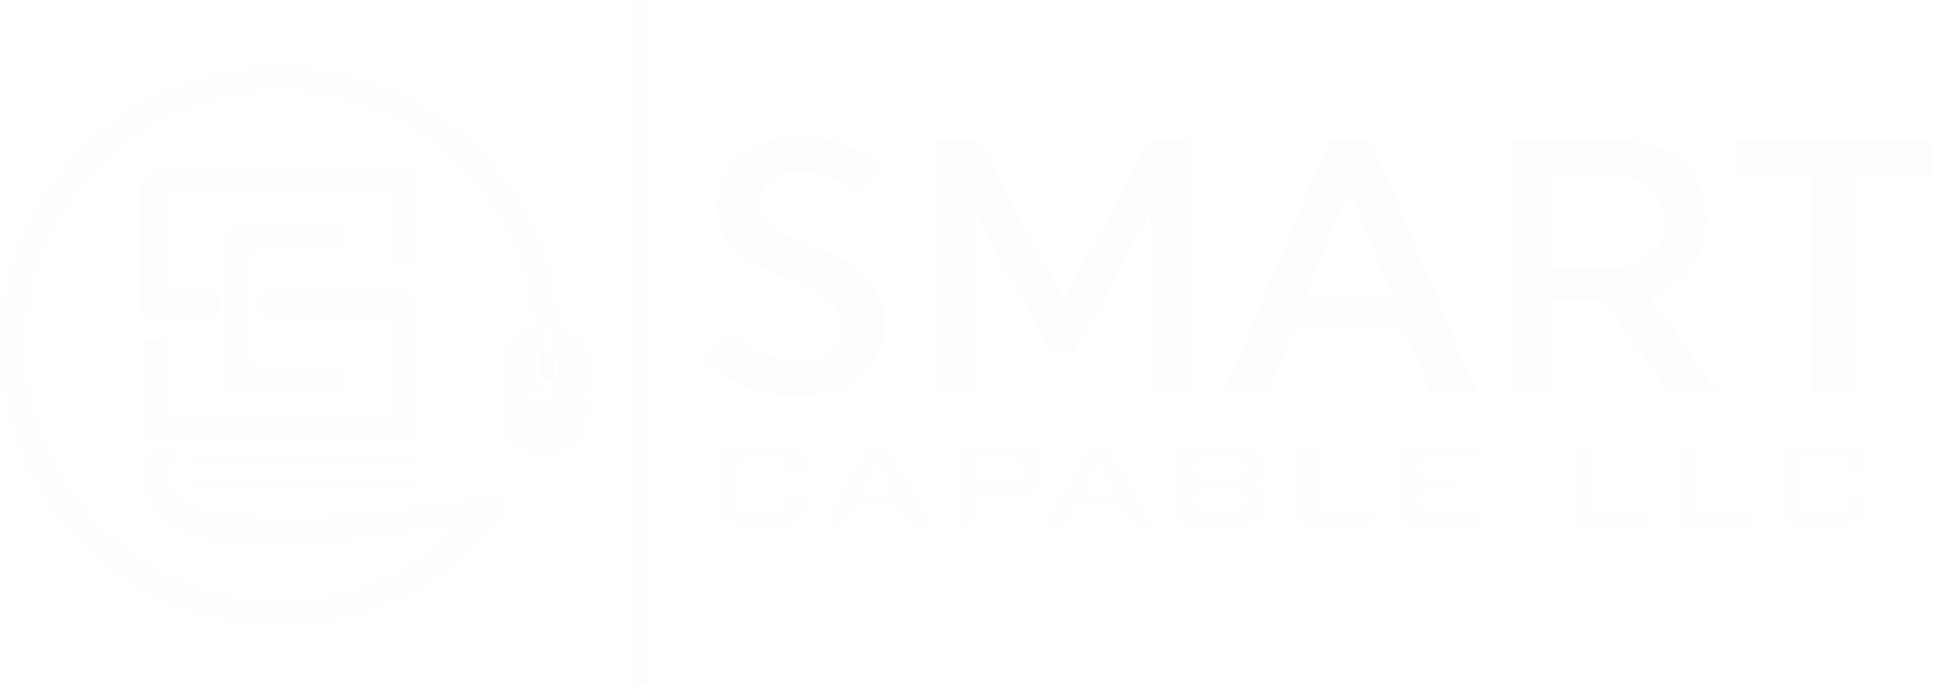 Smart Capable LLC - Transformational Opportunities